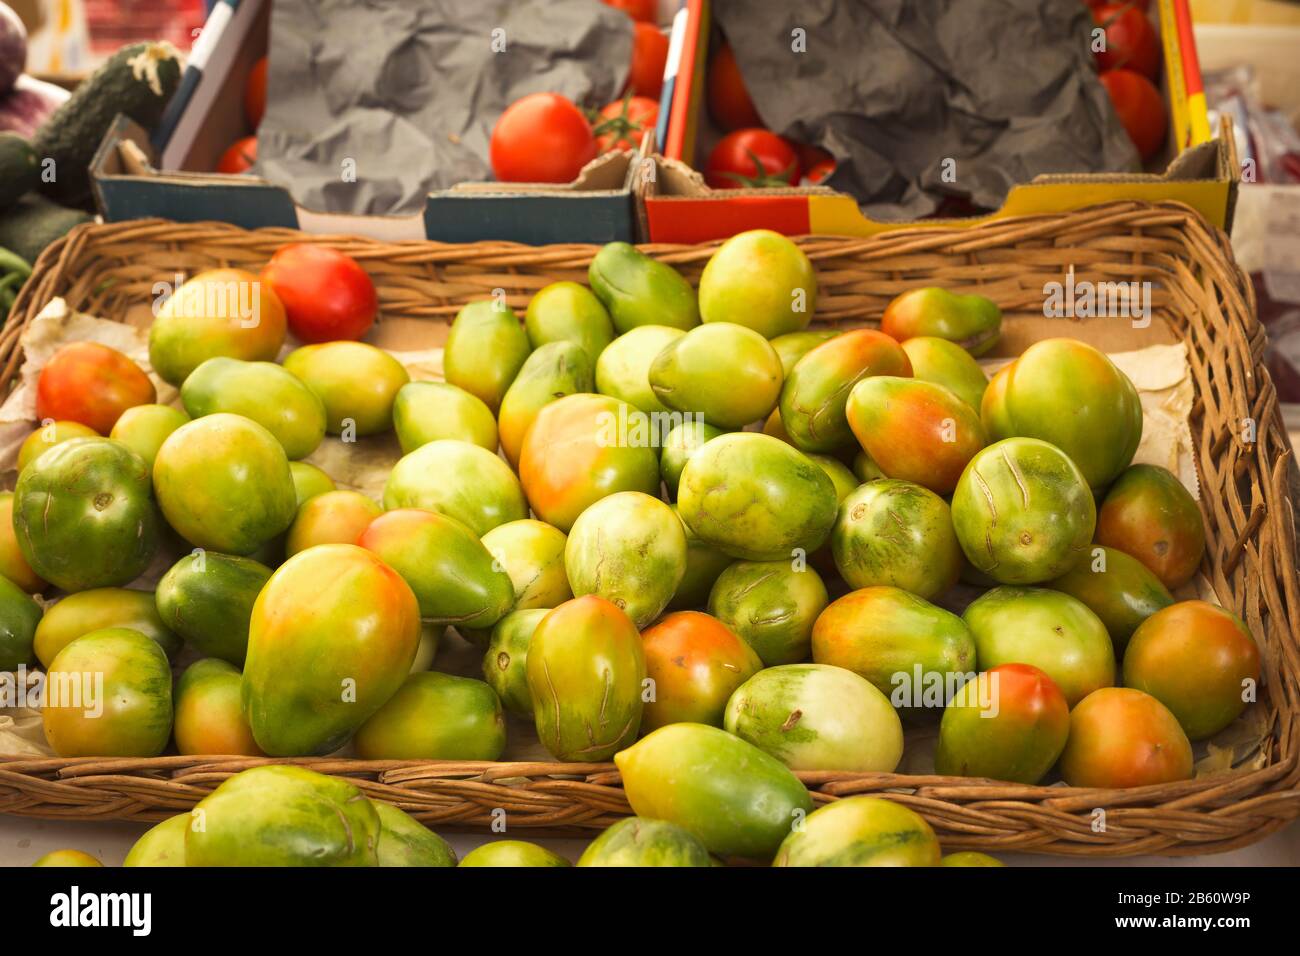 close-up pile of tomatoes in a wicker basket at the market Stock Photo